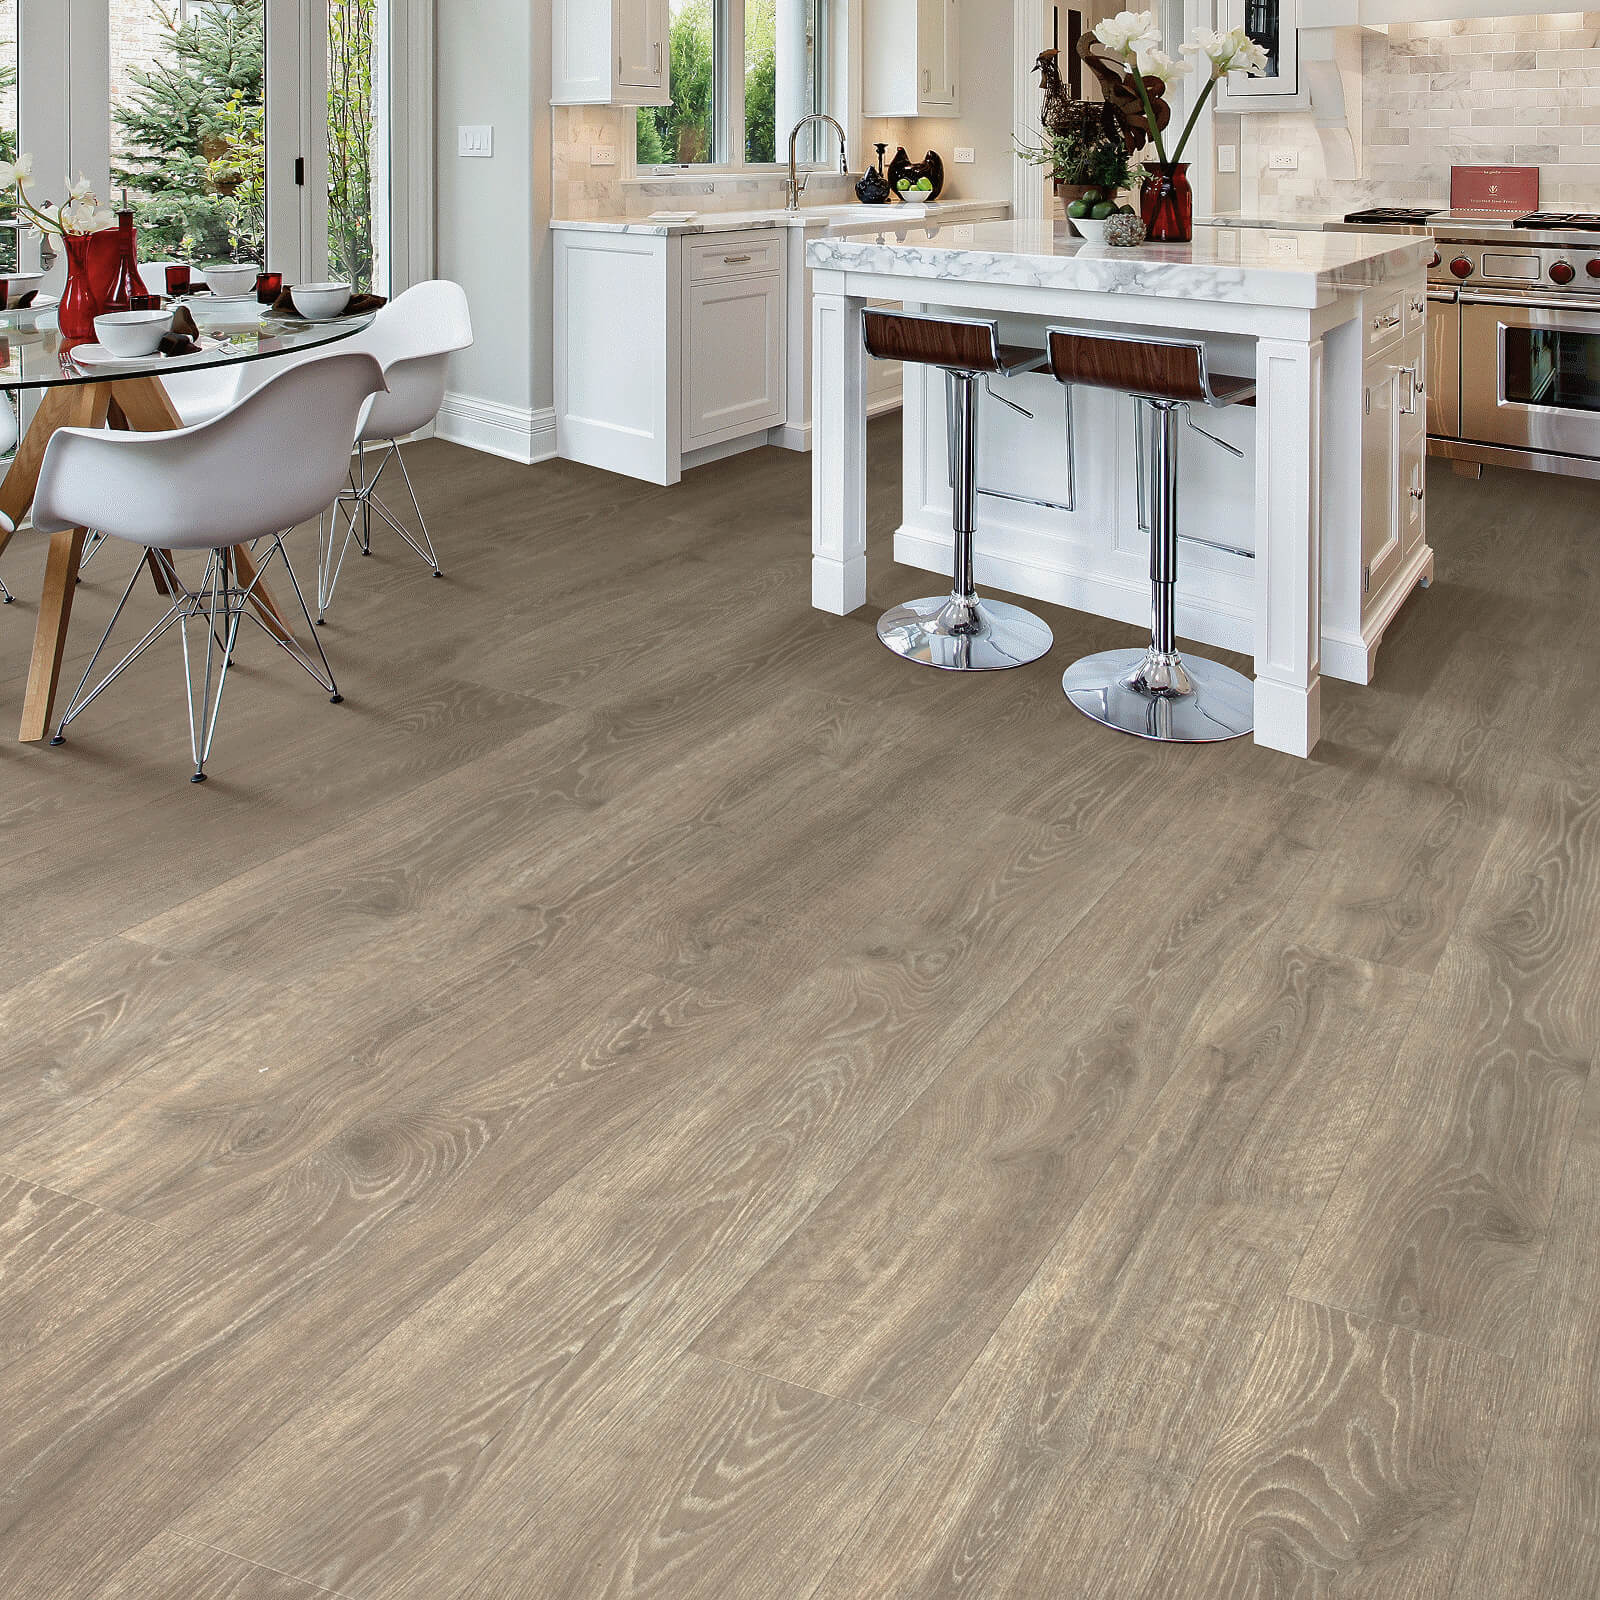 Laminate flooring in kitchen | Sterling Carpet and Flooring